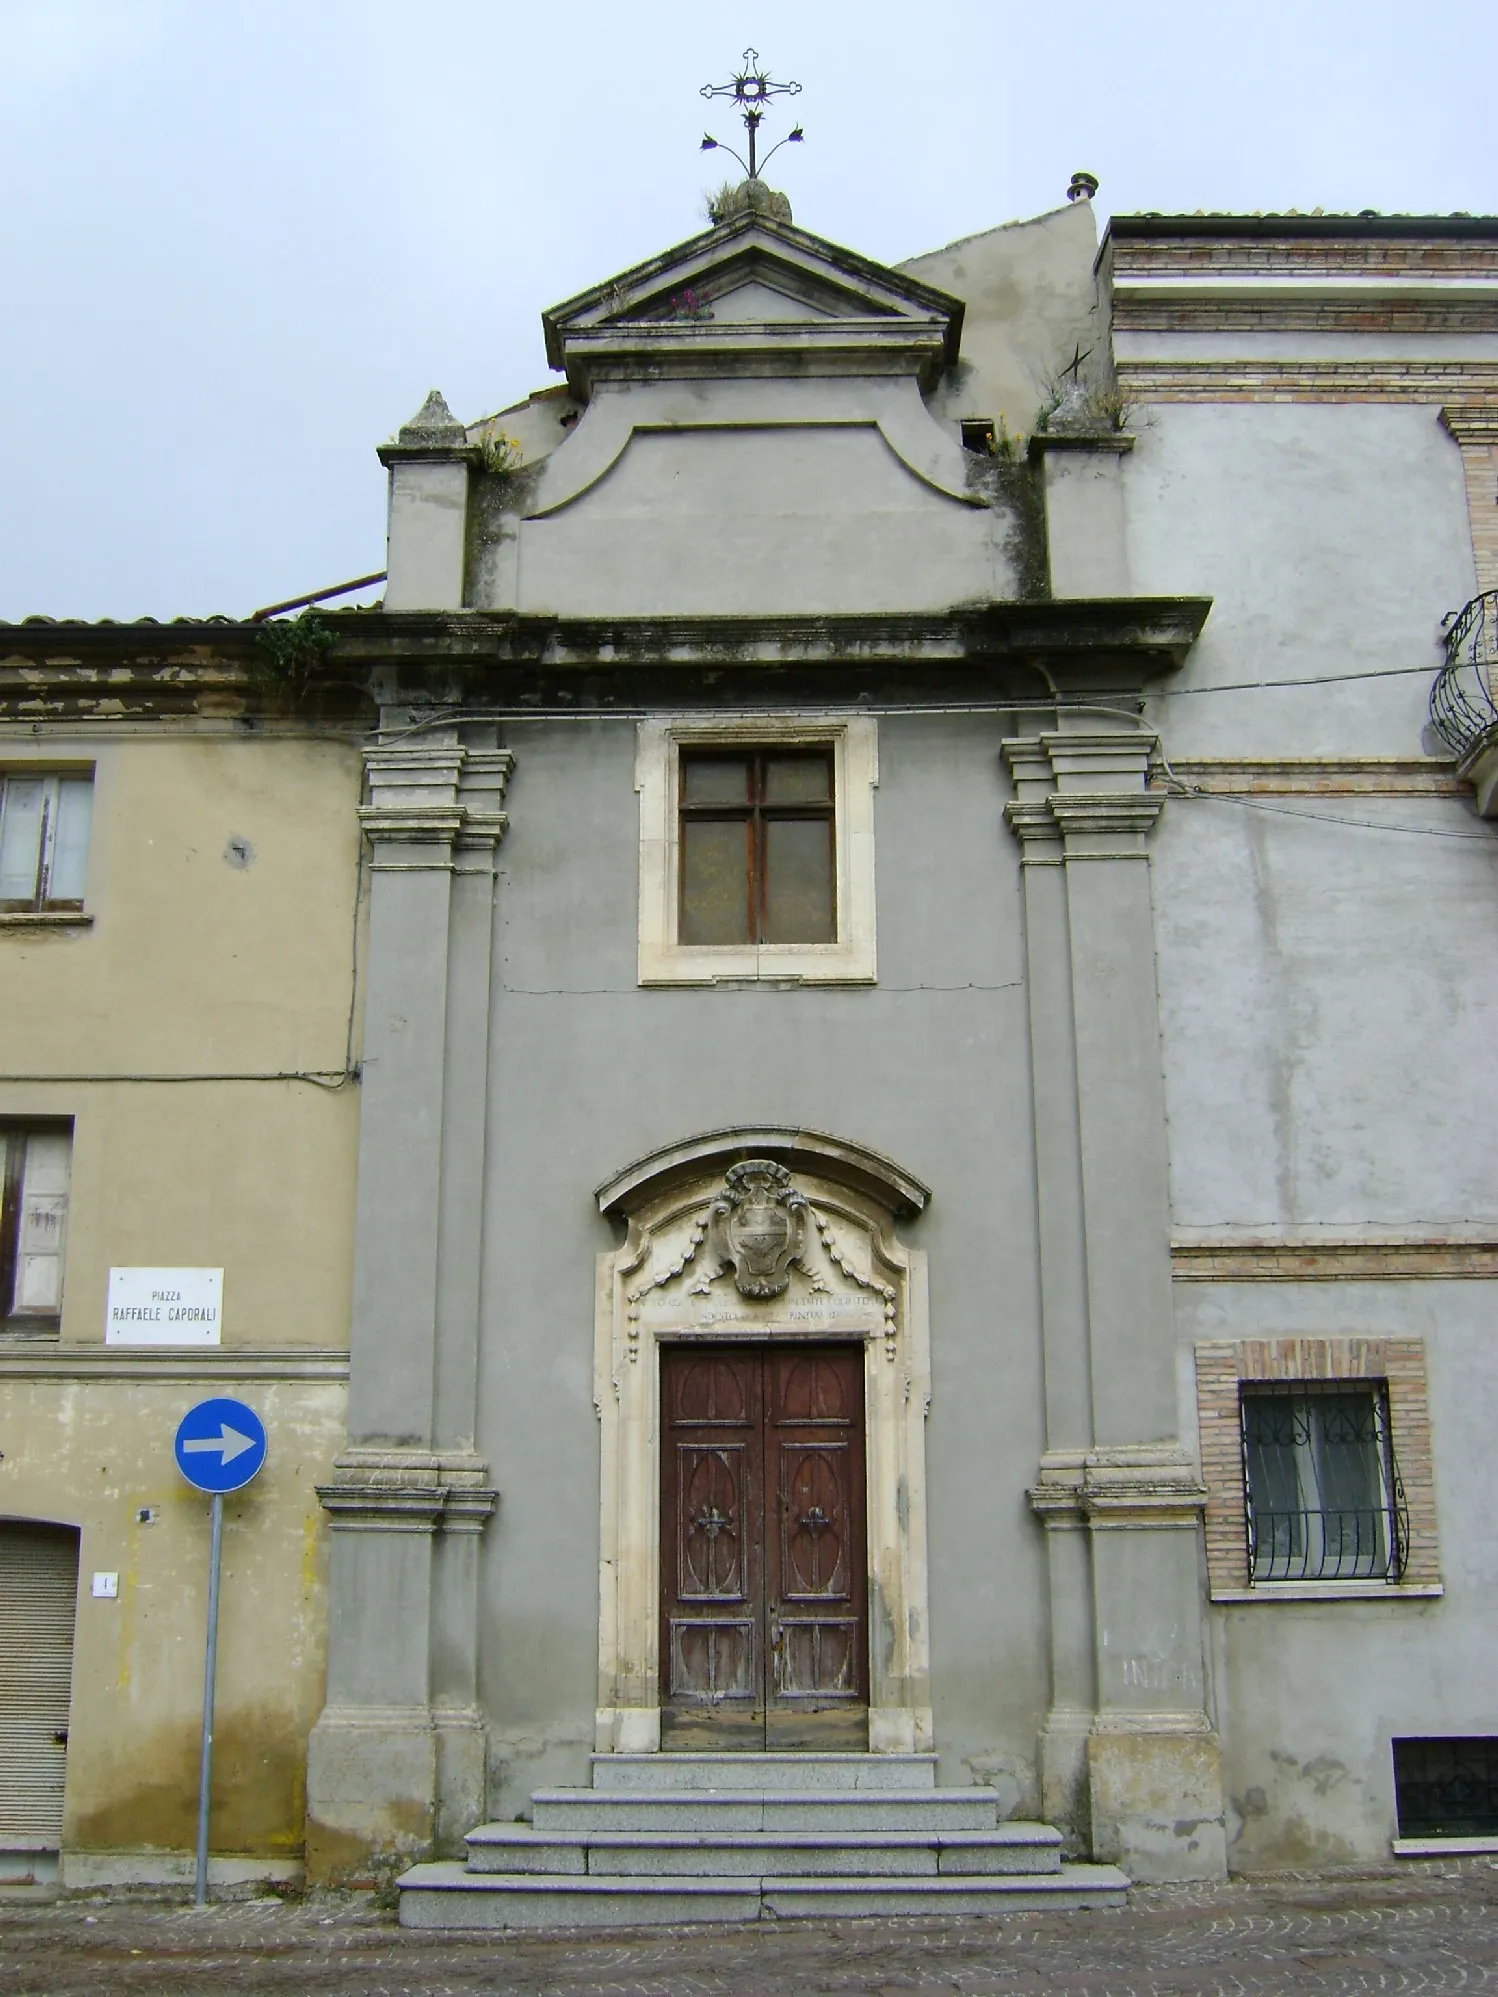 Photo showing: The noble Trinity church, Castel Frentano, province of Chieti.